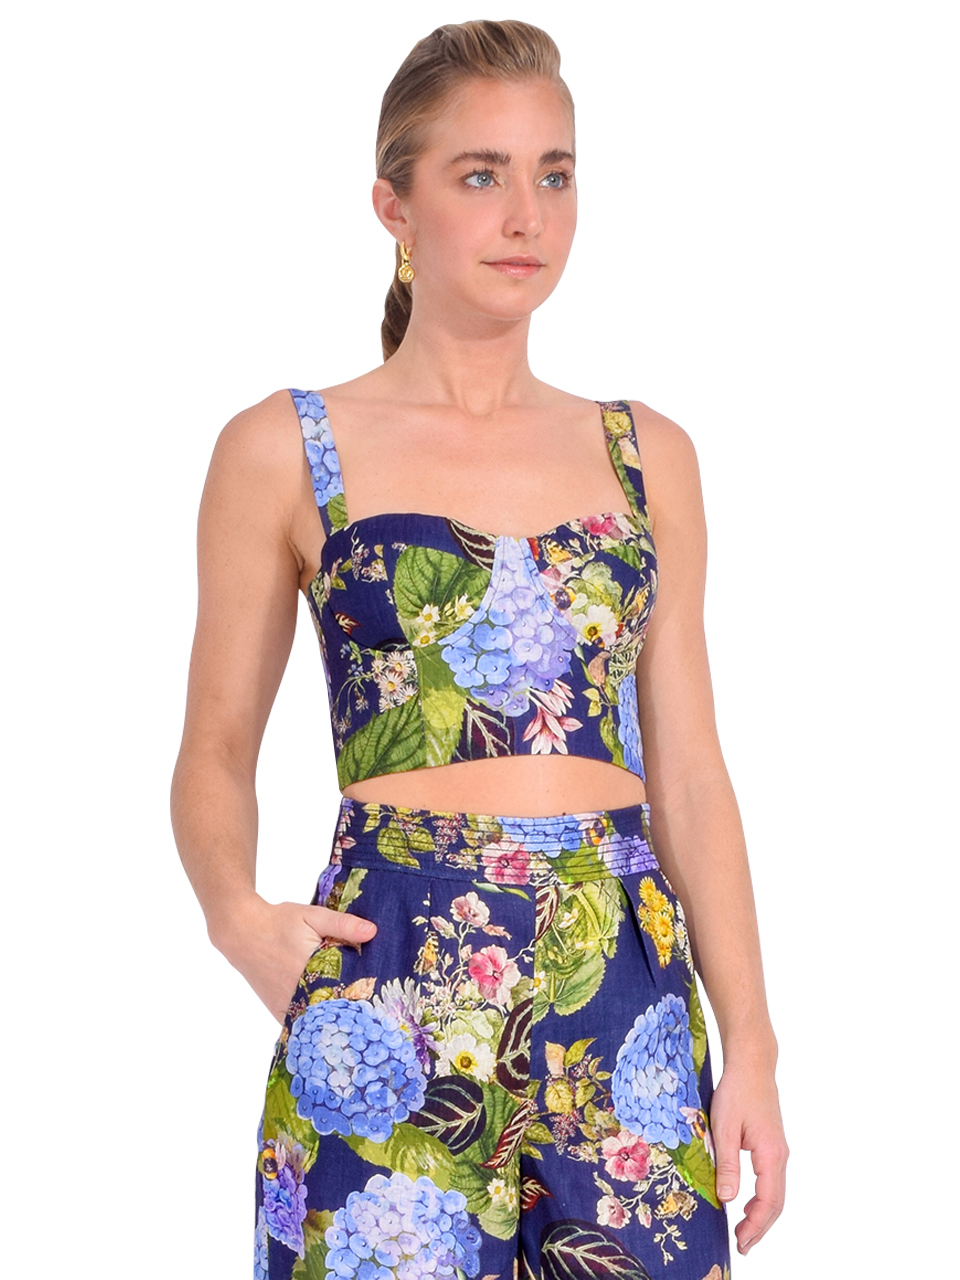 CARA CARA Claudine Top in Floral Evening Blue Side View 